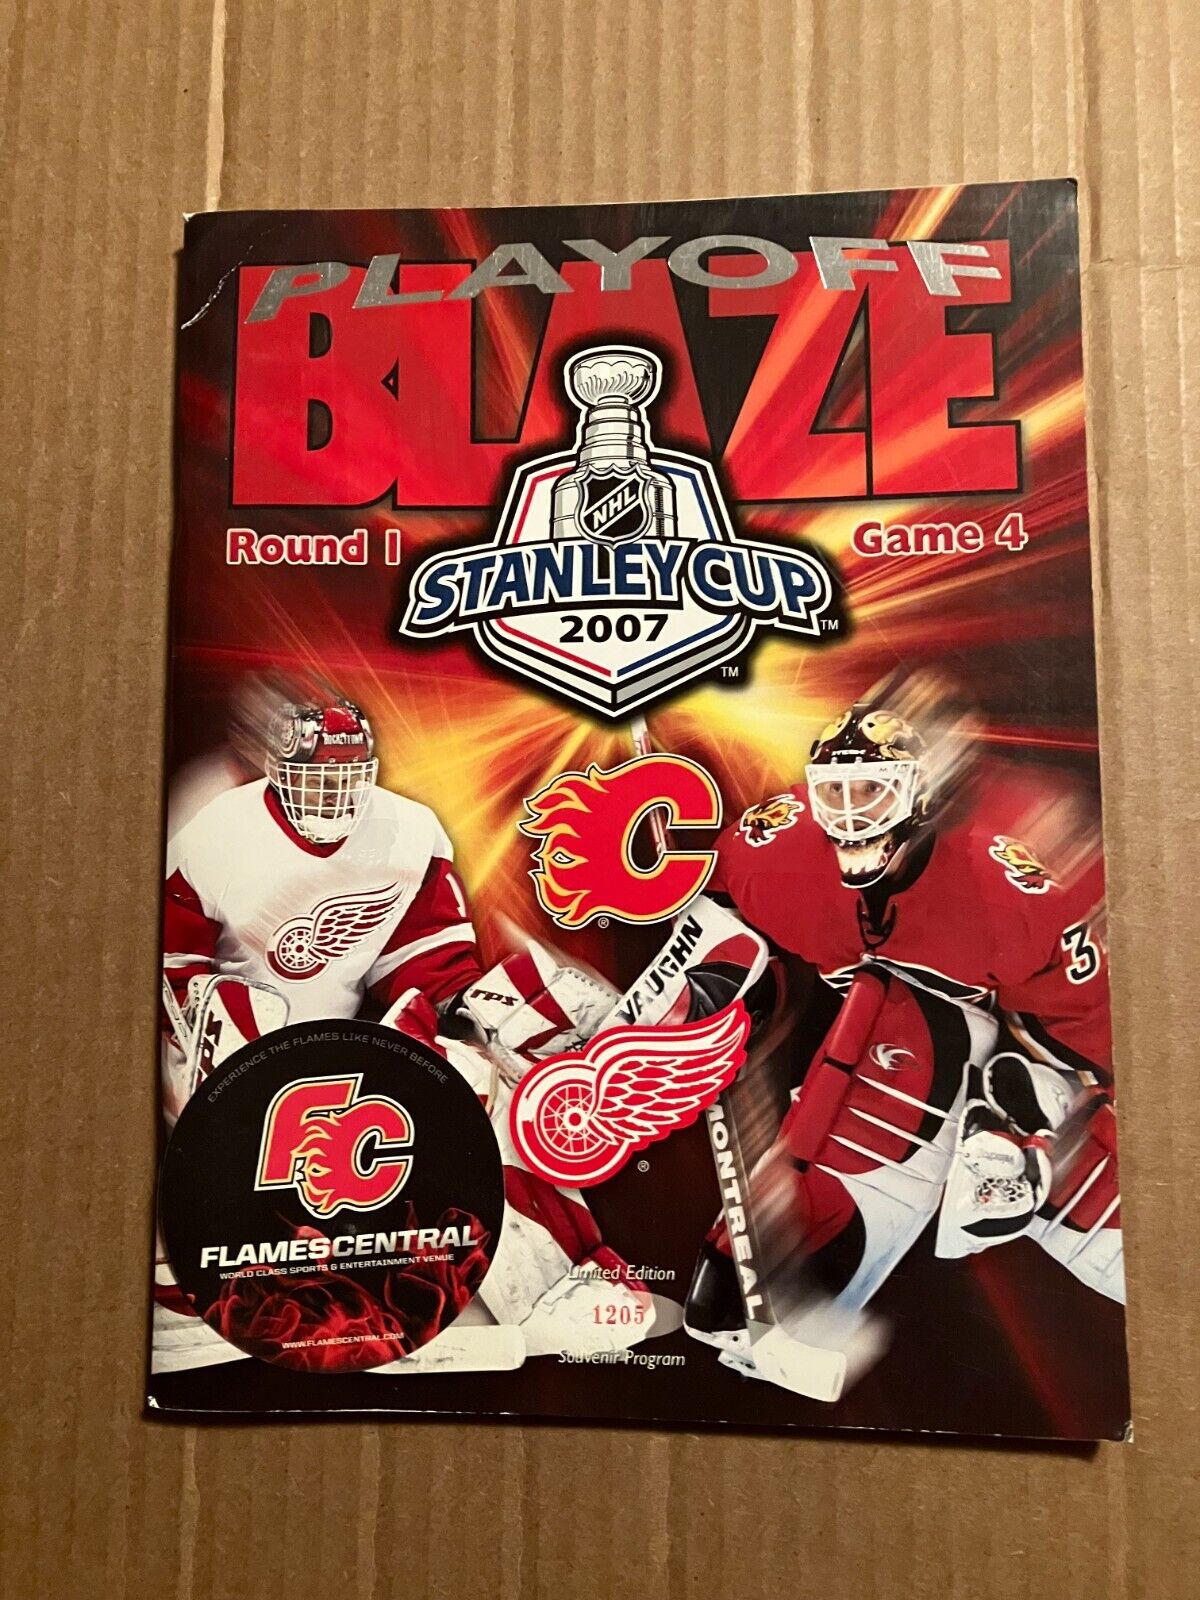 2006-07 Nhl Hockey Playoff Program: Detroit Red Wings At Calgary Flames, Apr 19